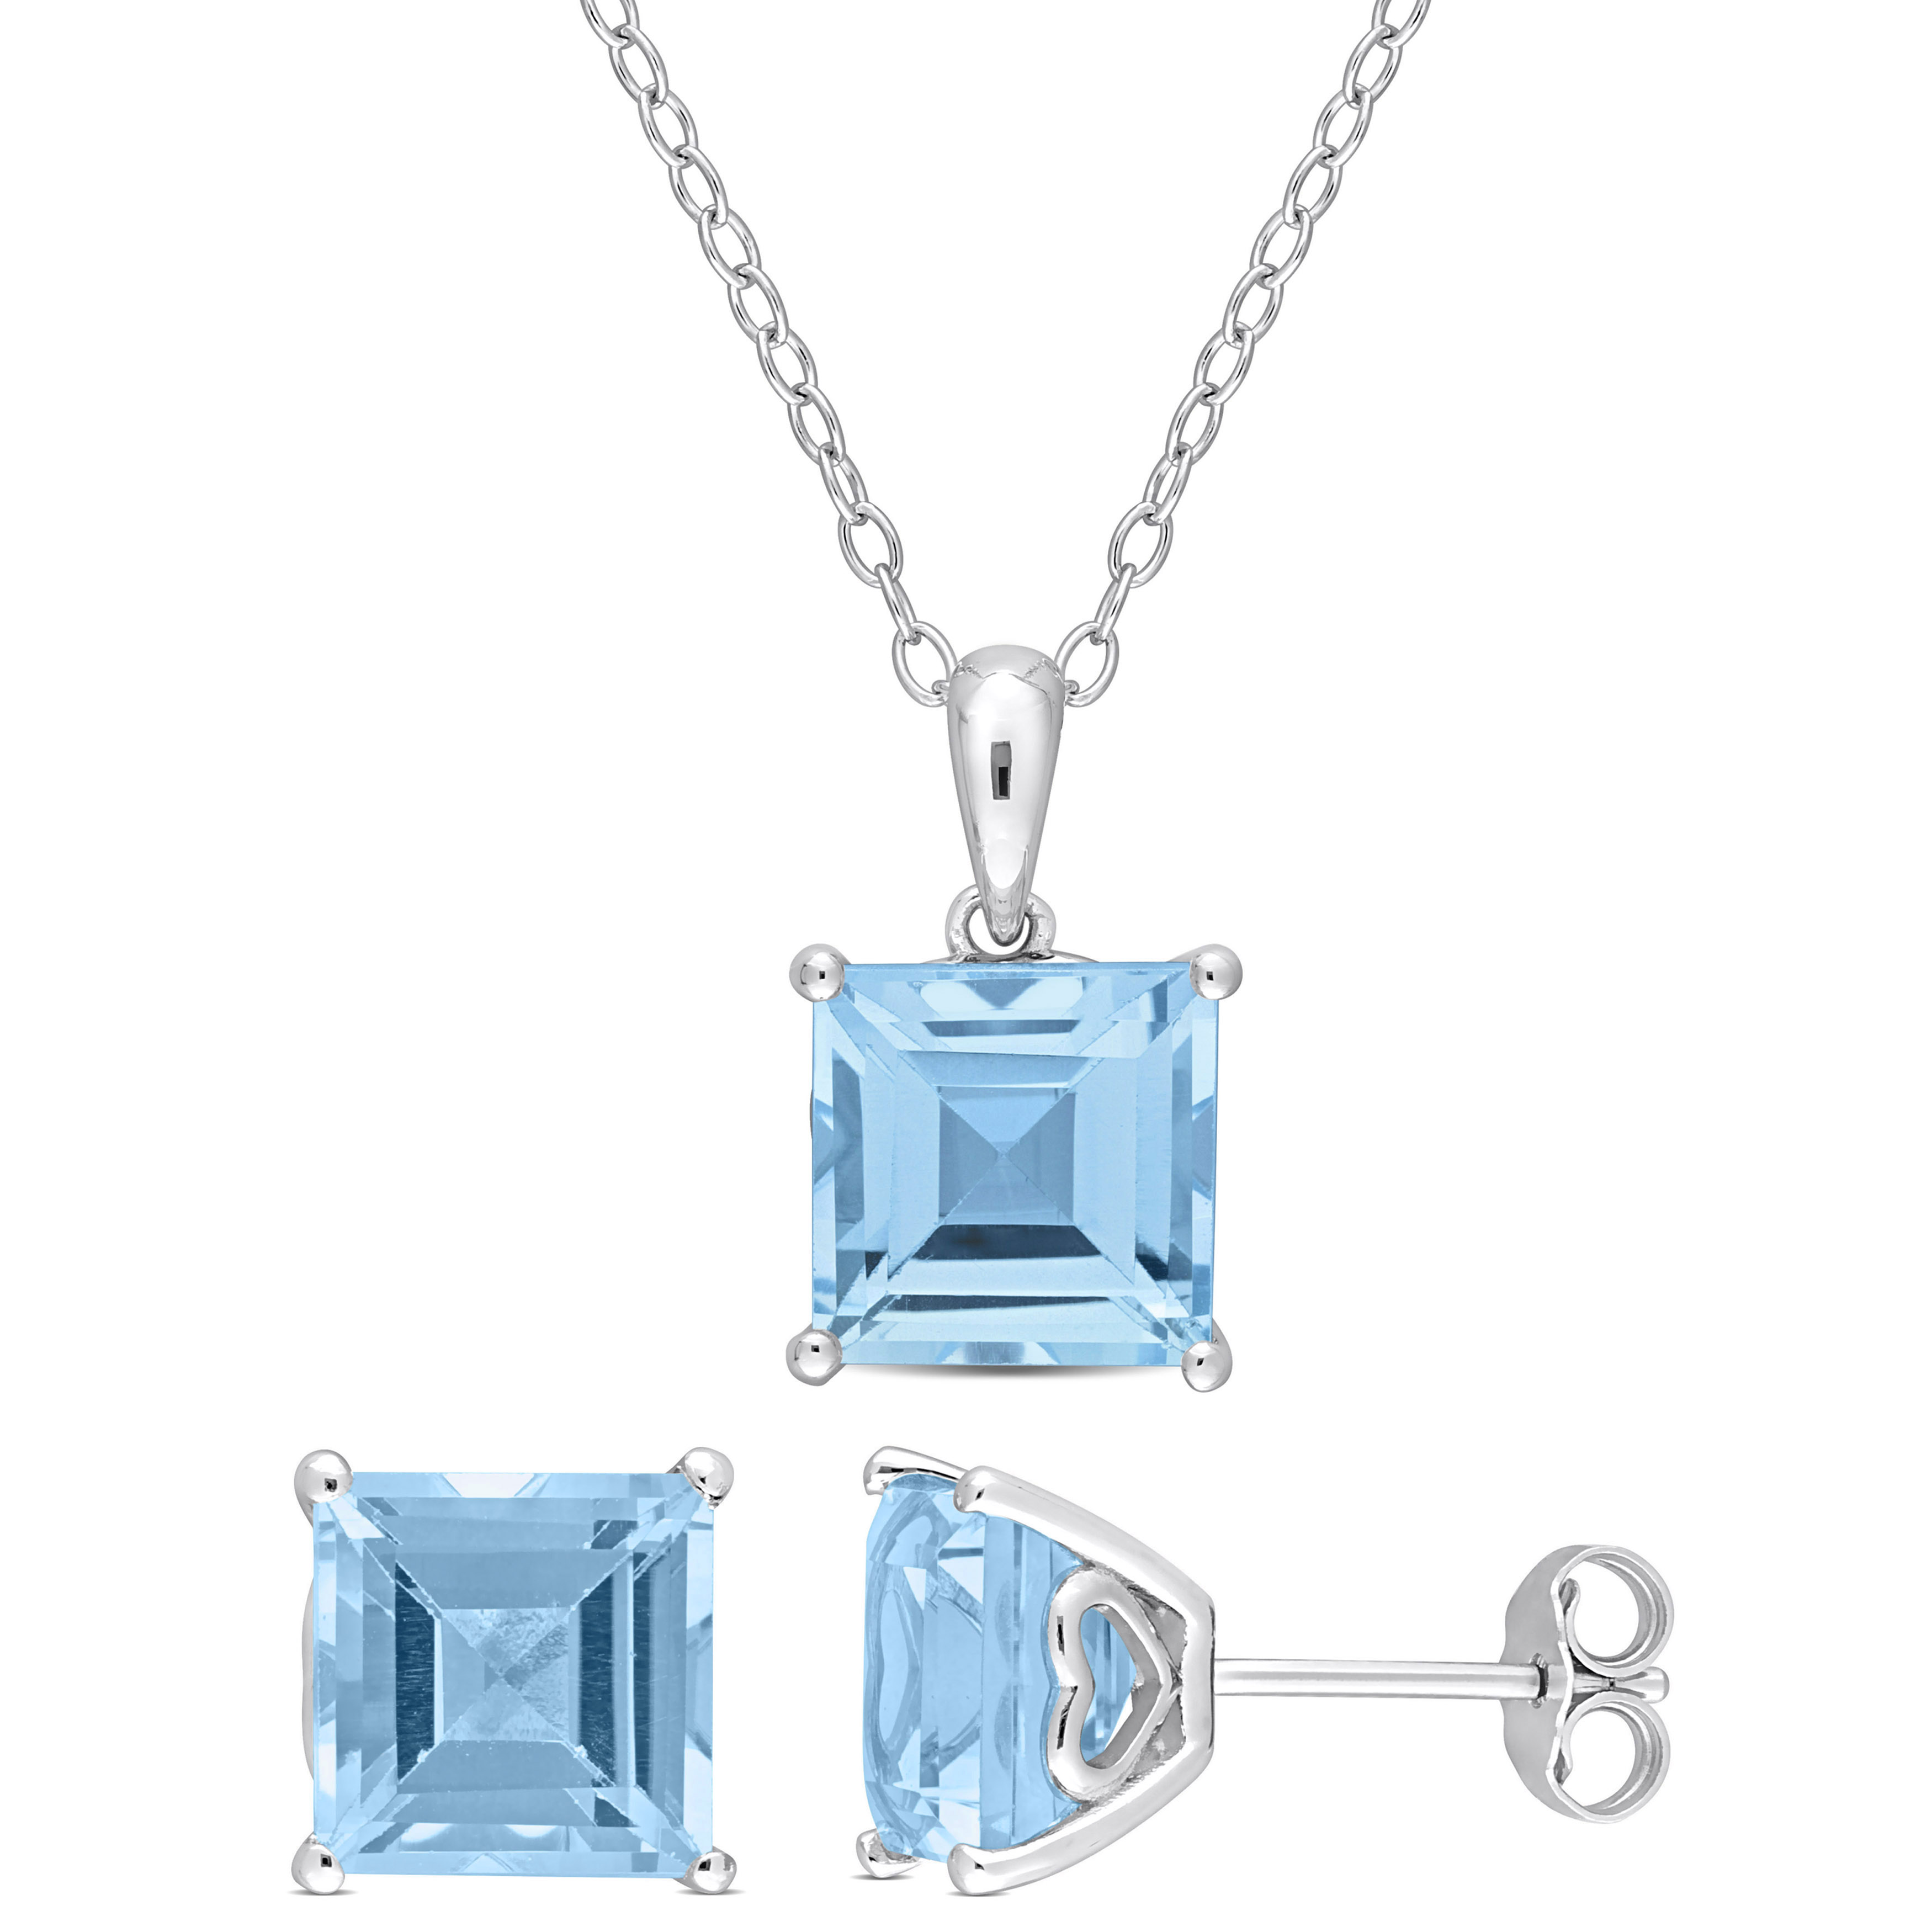 9 CT TGW Square Sky Blue Topaz 2-Piece Set of Pendant with Chain and Earrings in Sterling Silver